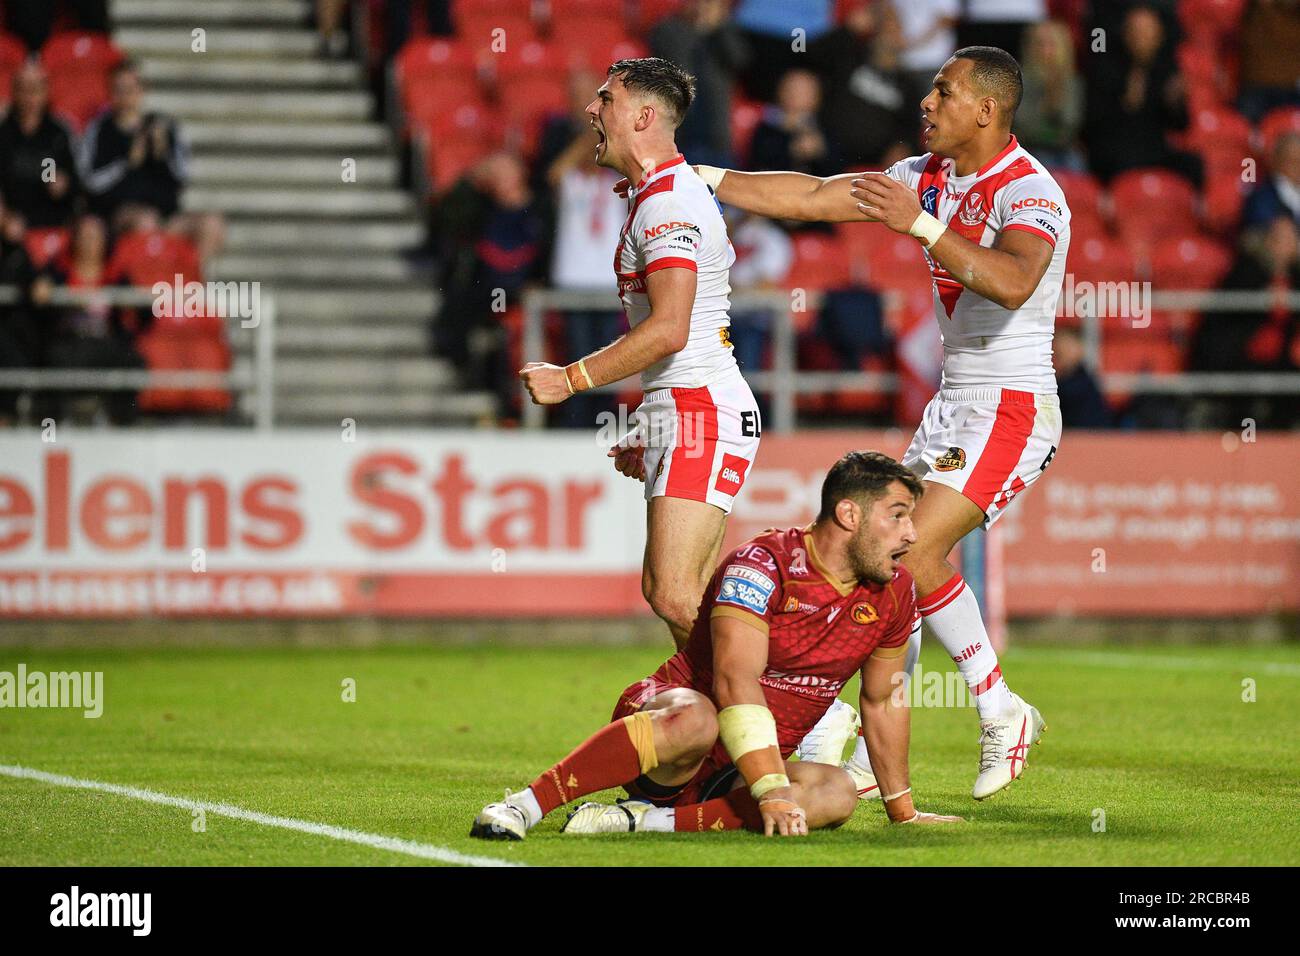 St. Helens, Angleterre - 13 juillet 2023 - Lewis Dodd de St Helens marque un essai. Betfred Super League, St. Helens vs Catalan Dragons au Totally Wicked Stadium, St. Helens, Royaume-Uni Banque D'Images